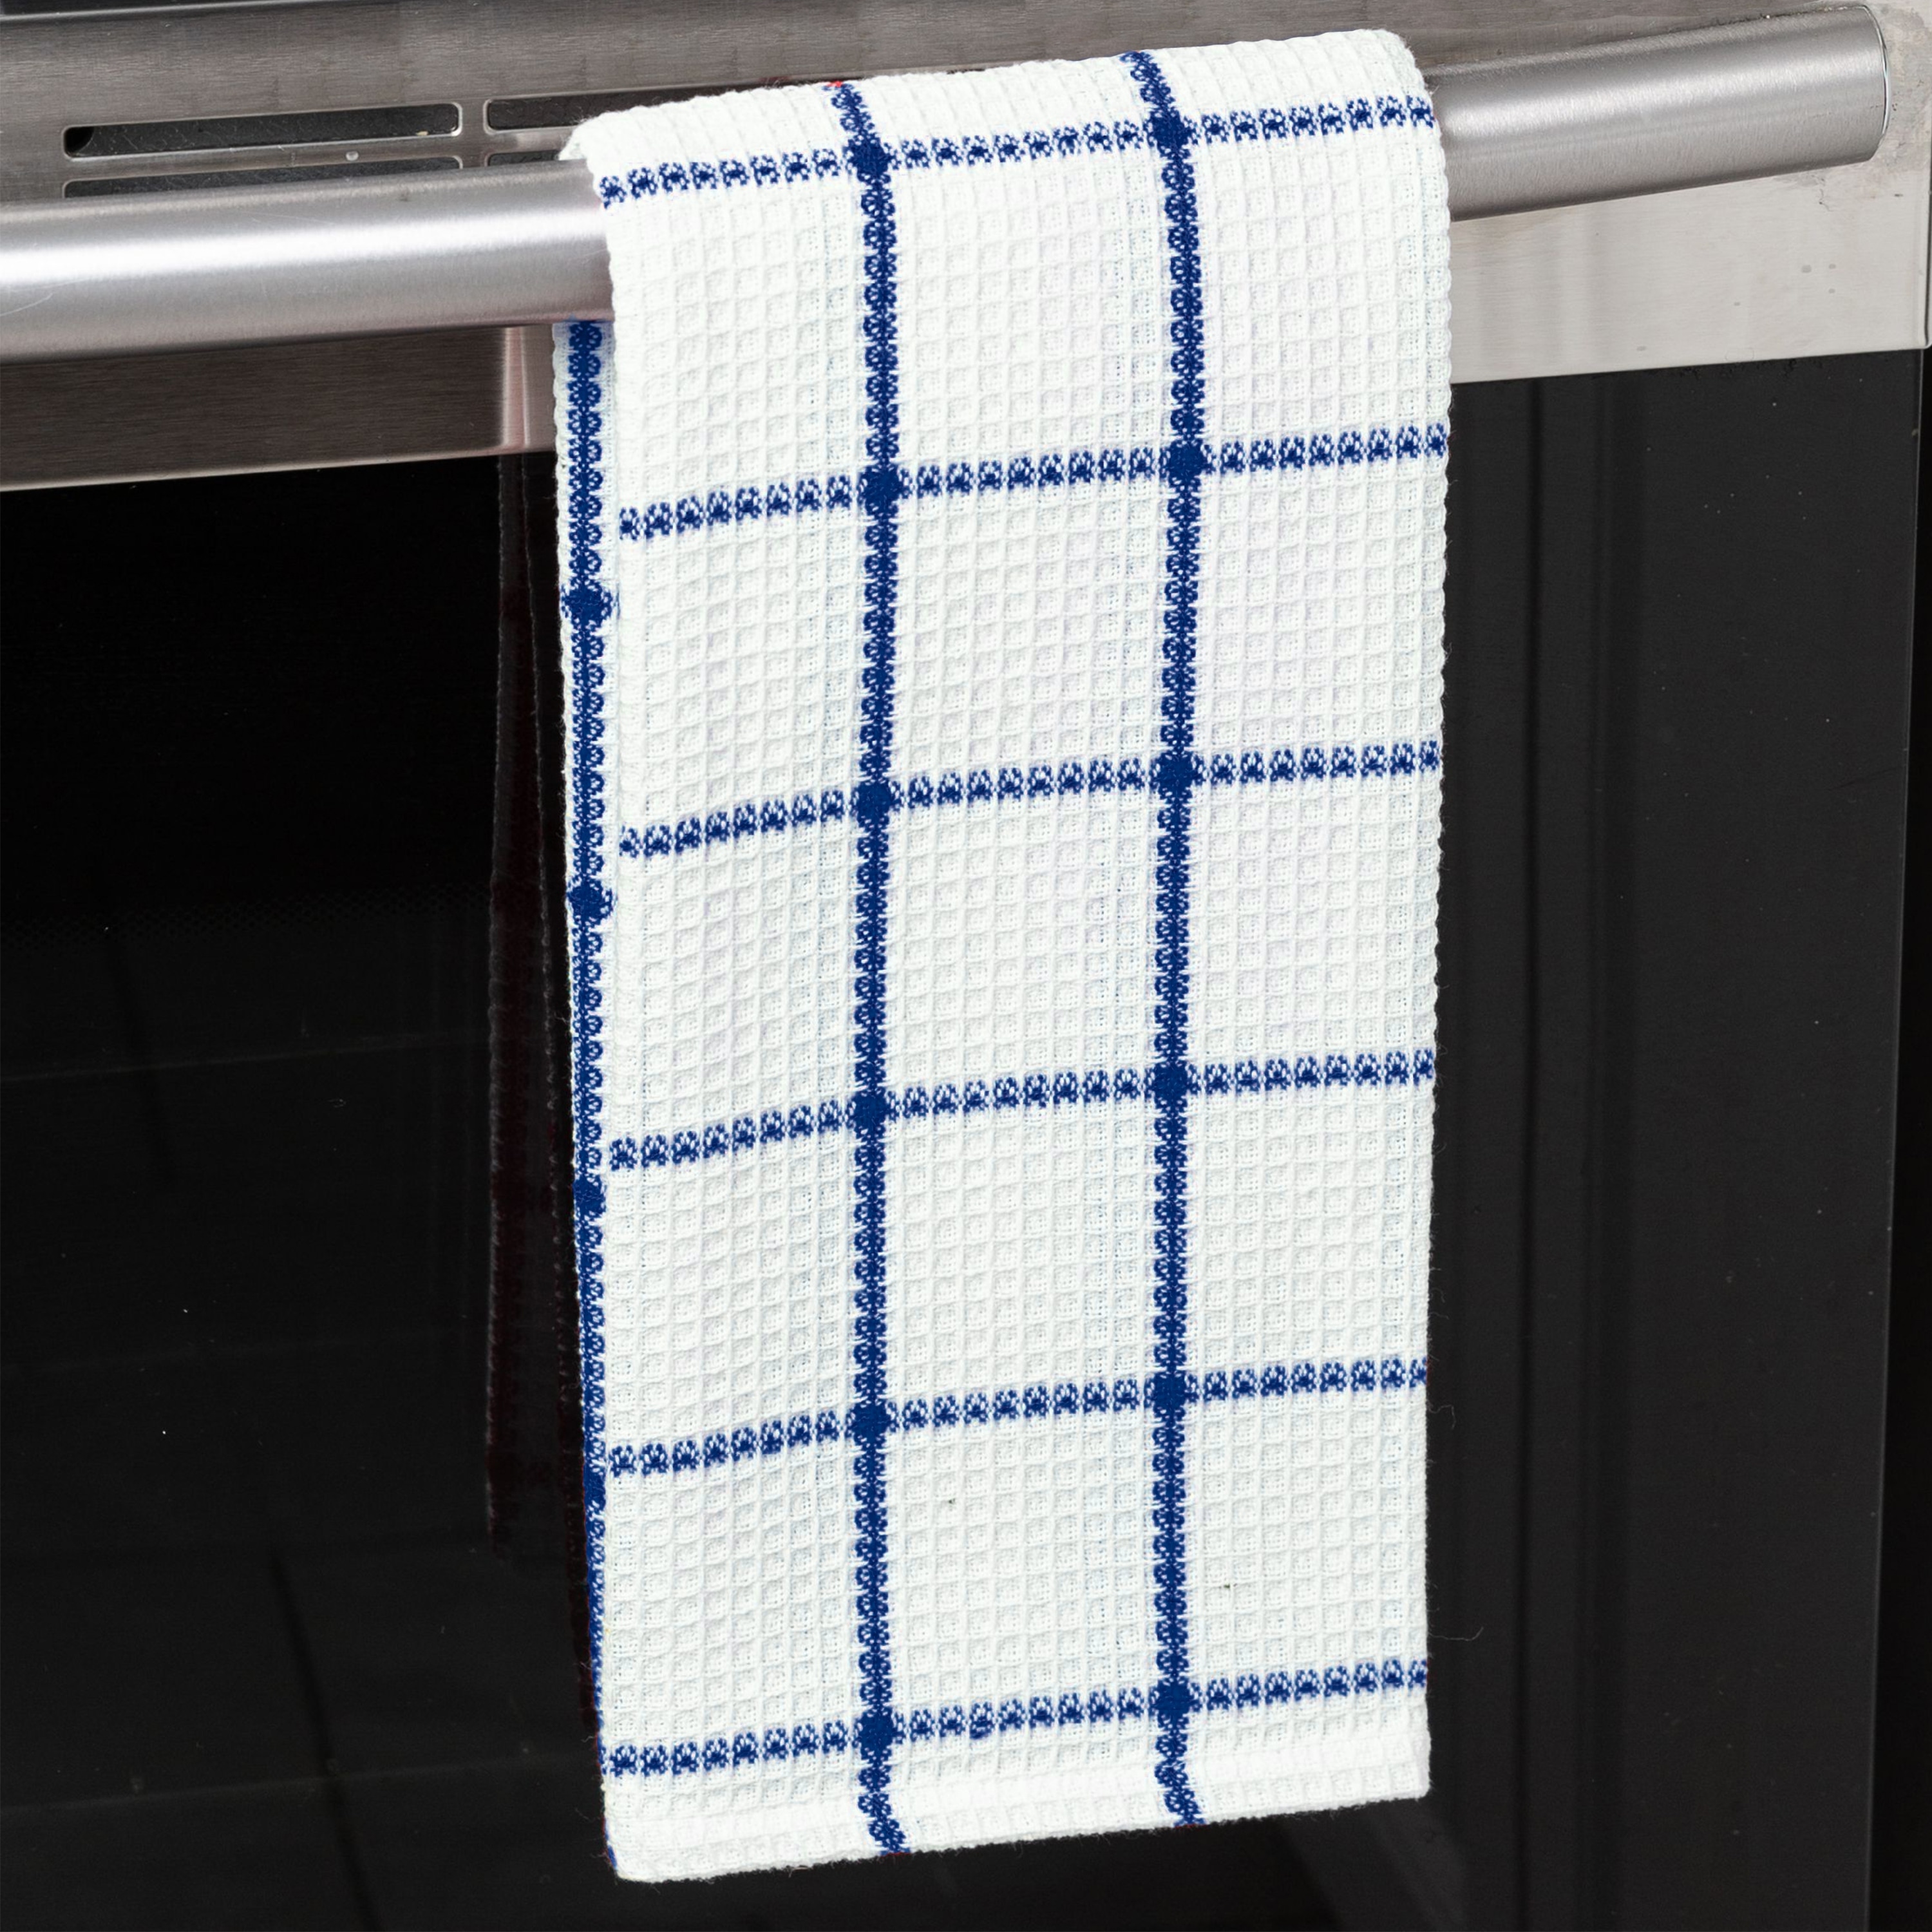 https://ak1.ostkcdn.com/images/products/is/images/direct/3d1bc4c48af43c89273b686d5ca3ecc48caaee66/Fabstyles-Solo-Waffle-Cotton-Kitchen-Towel-Set-of-4.jpg